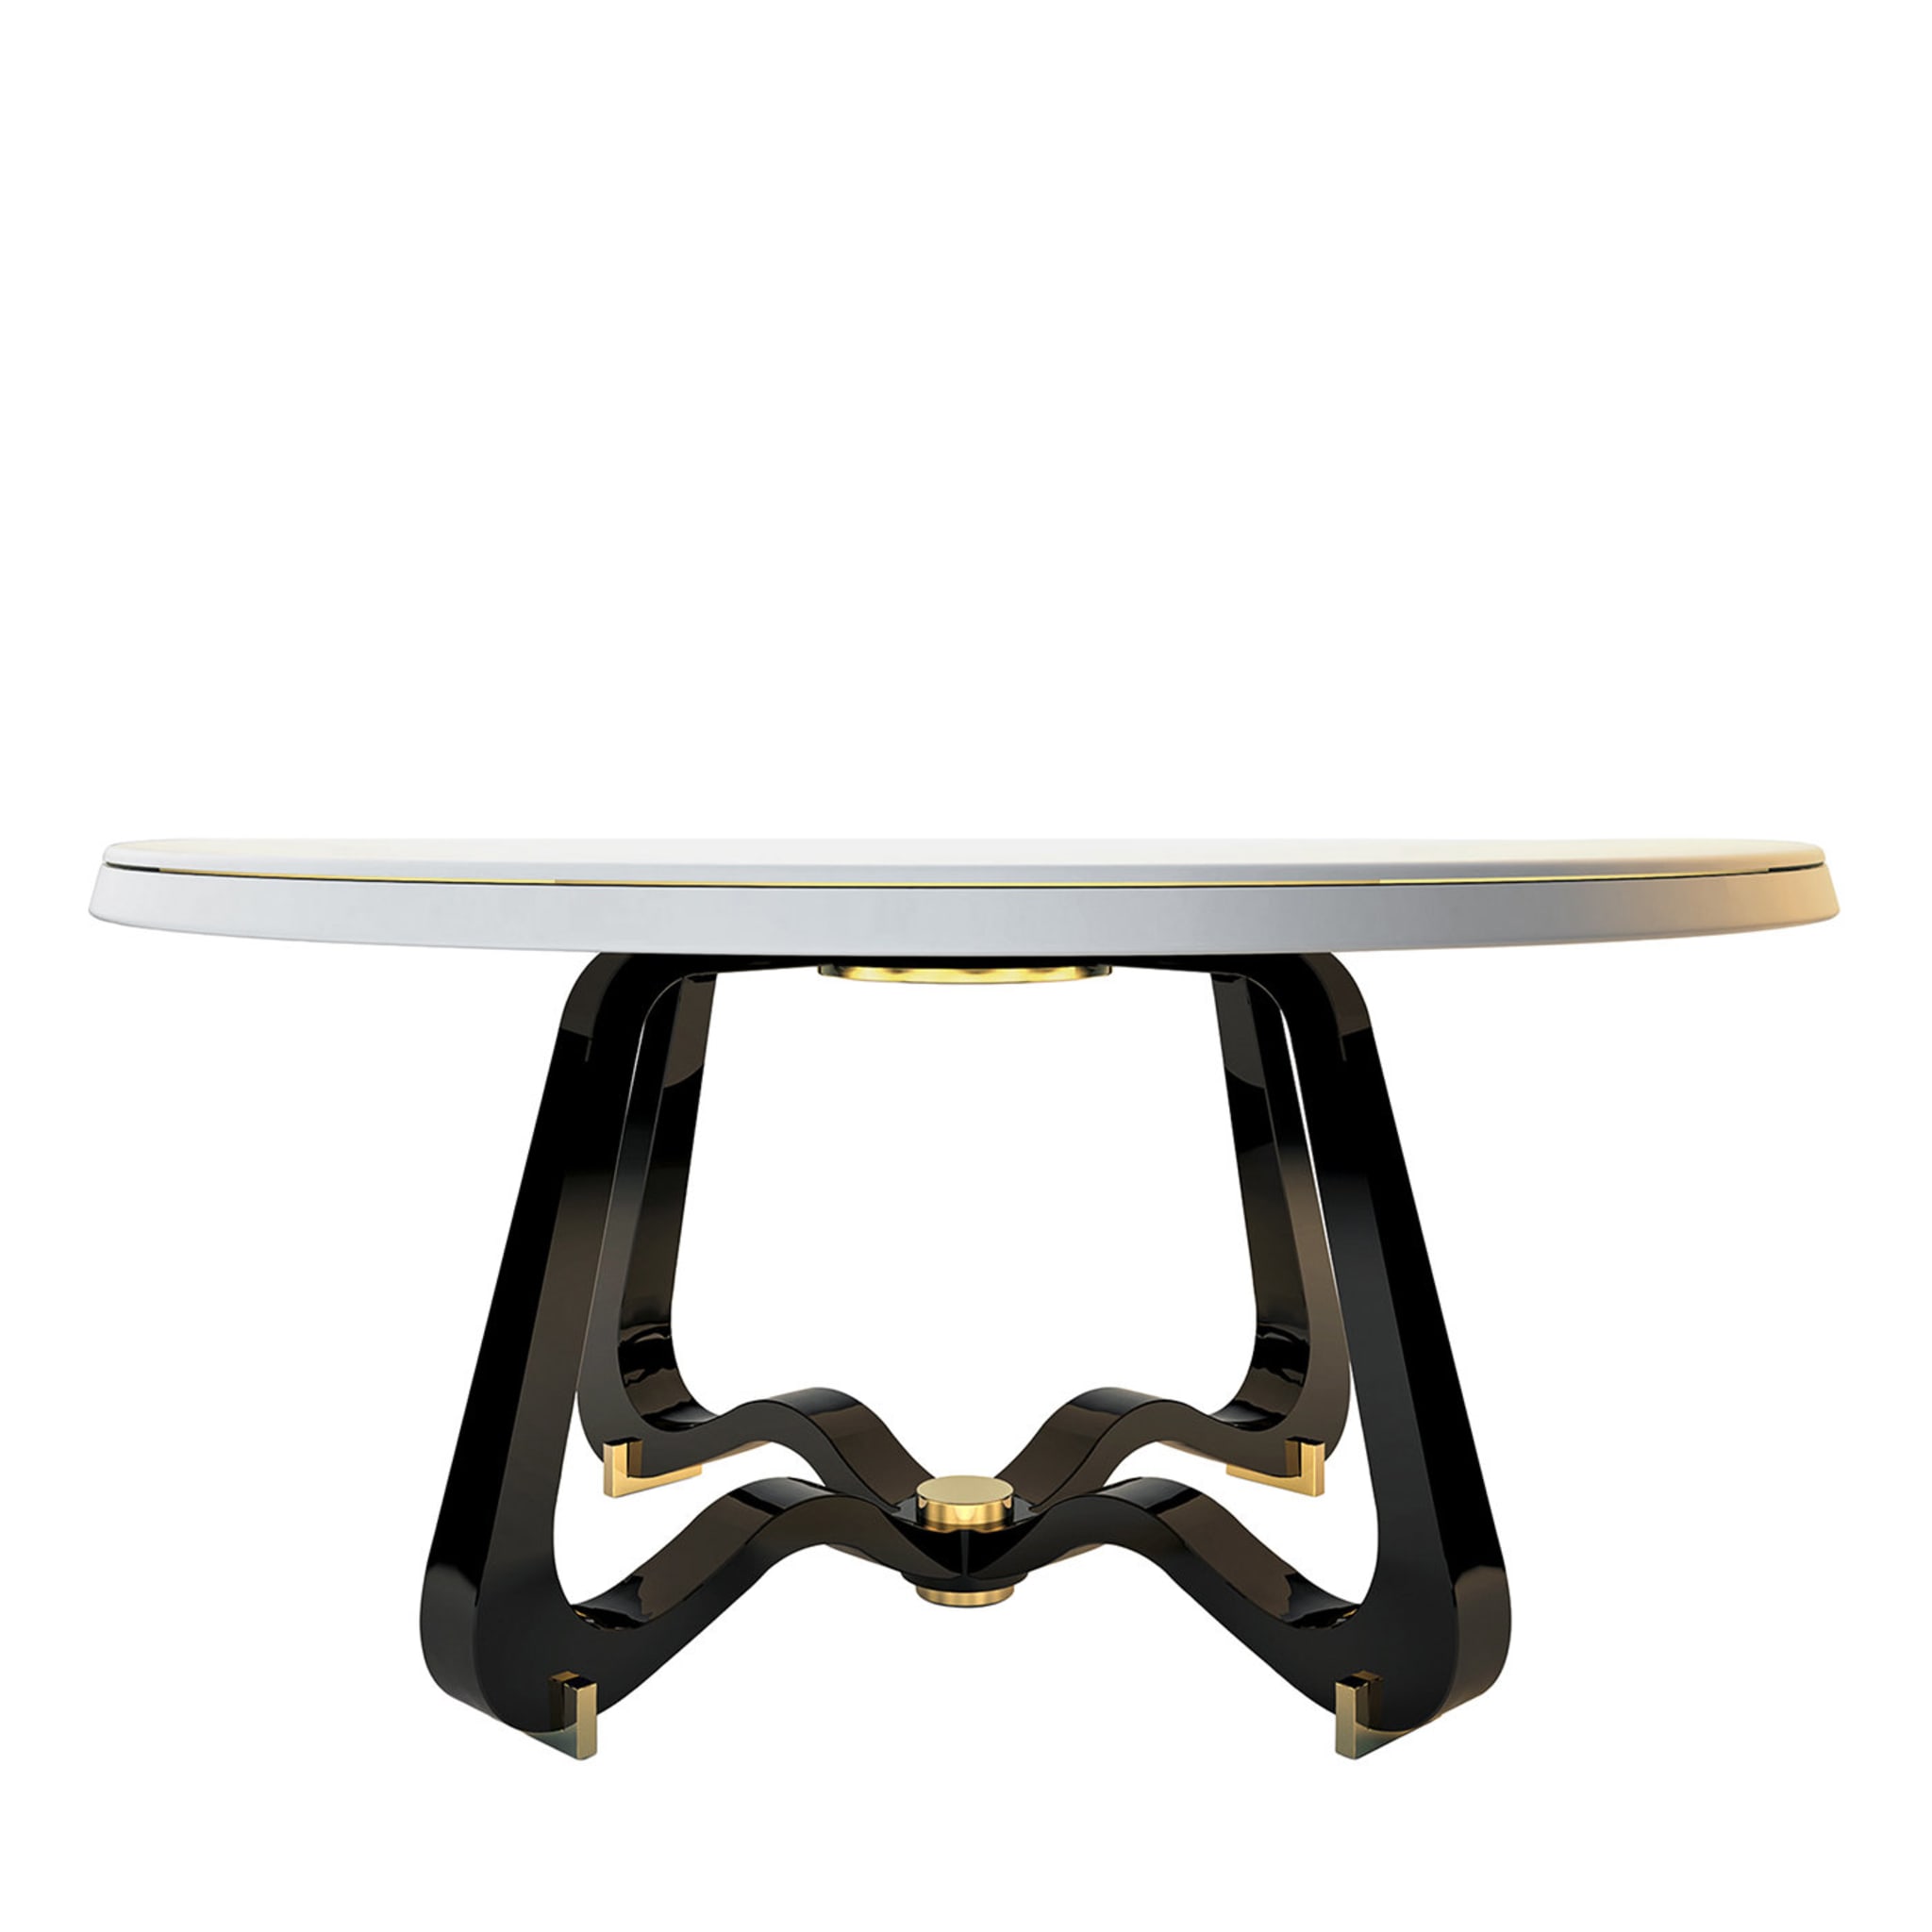 Wilde Dining Table #2 By Giannella Ventura - Main view